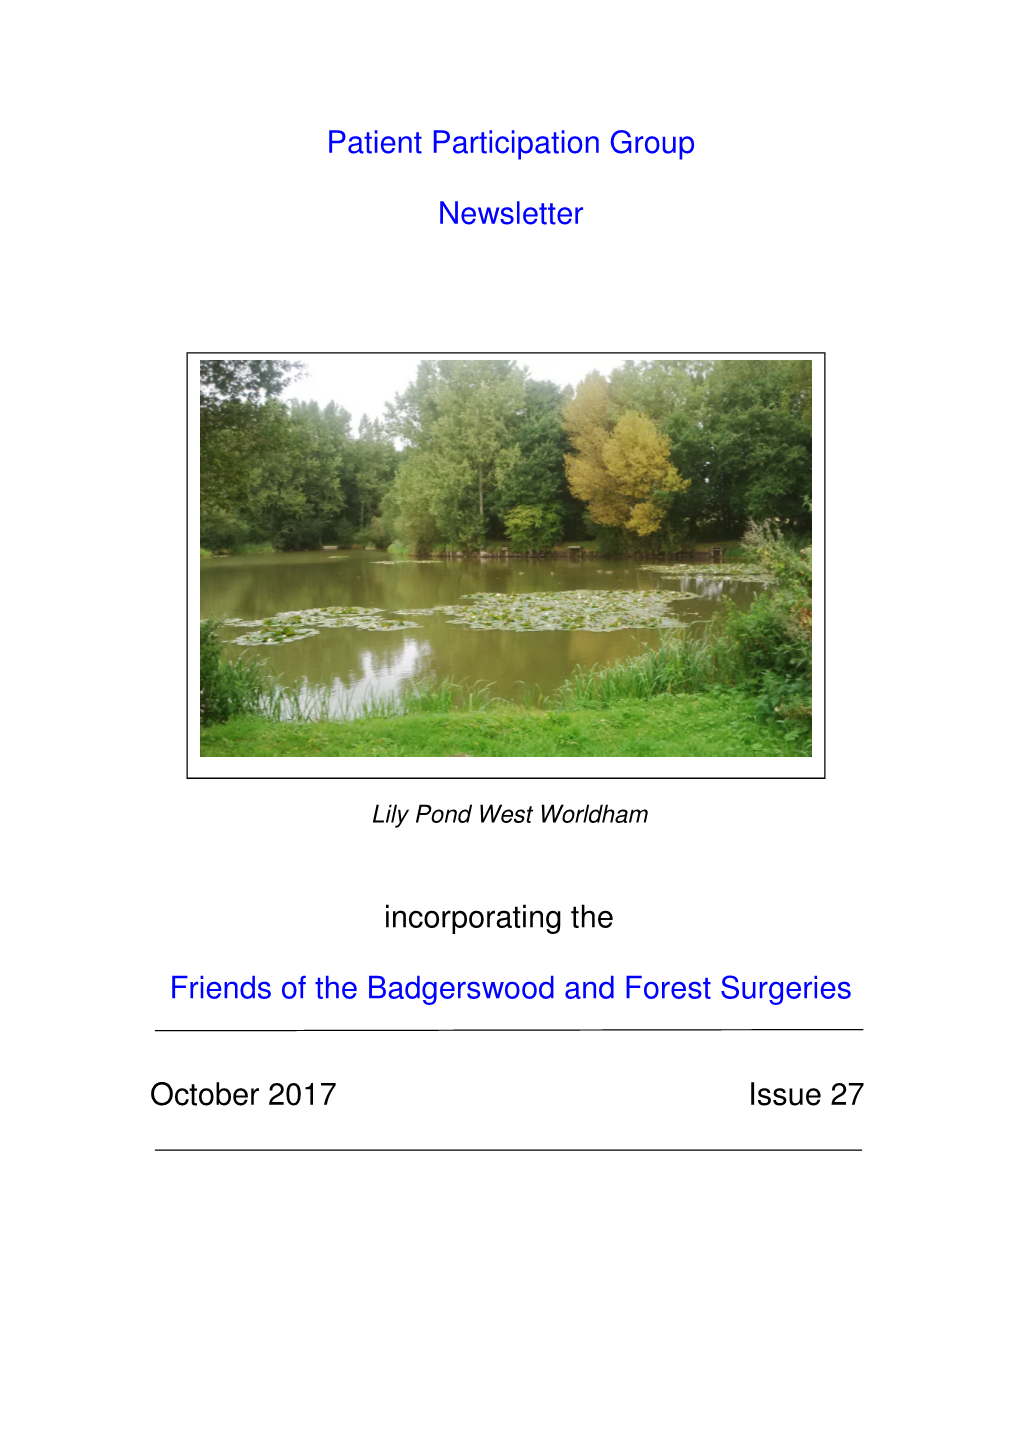 Patient Participation Group Newsletter Incorporating the Friends of the Badgerswood and Forest Surgeries October 2017 Issue